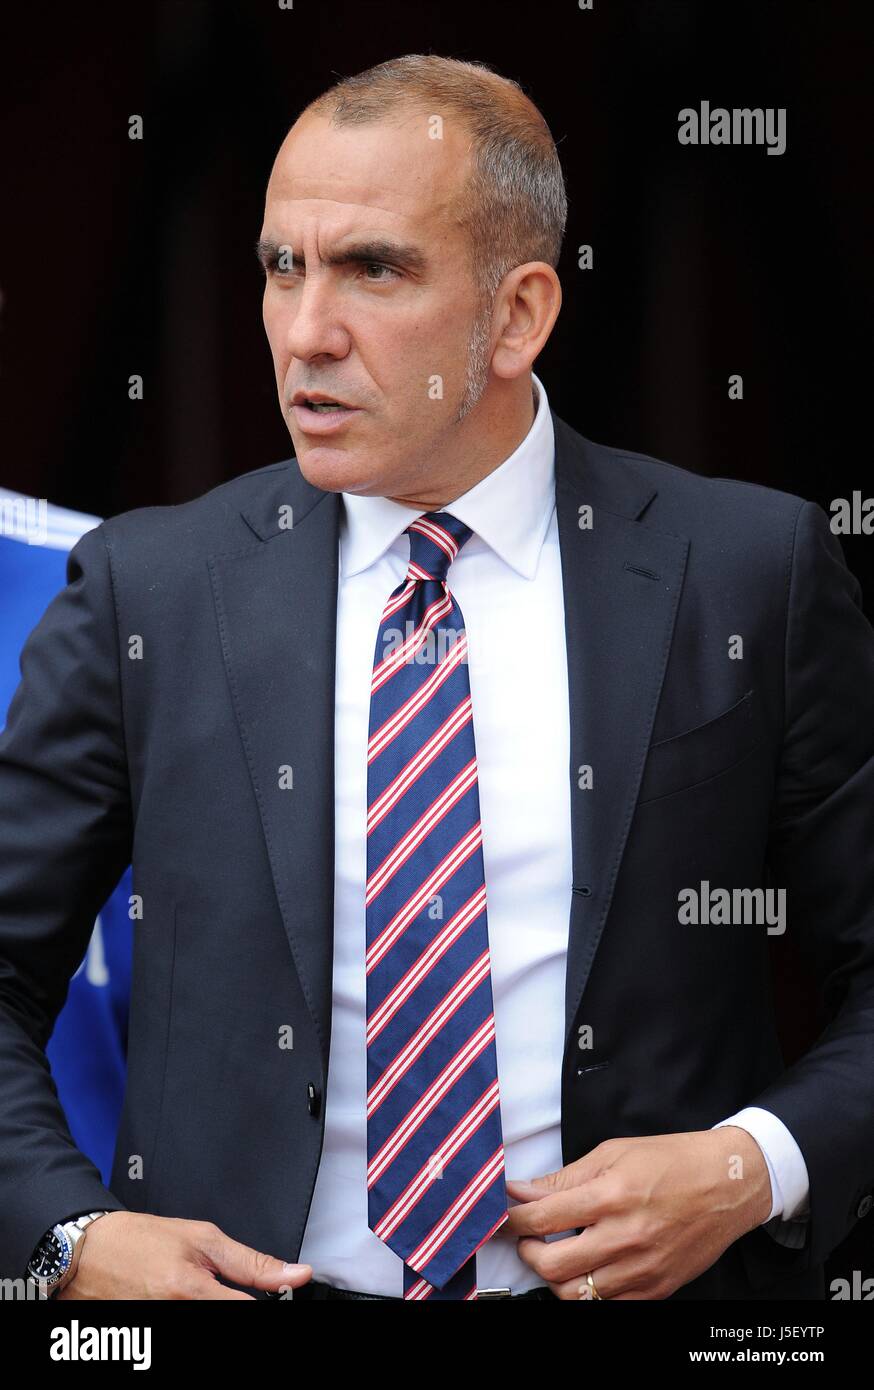 PAOLO DI CANIO SHEFFIELD WEDNESDAY FC 14 August 1997 Stock Photo - Alamy